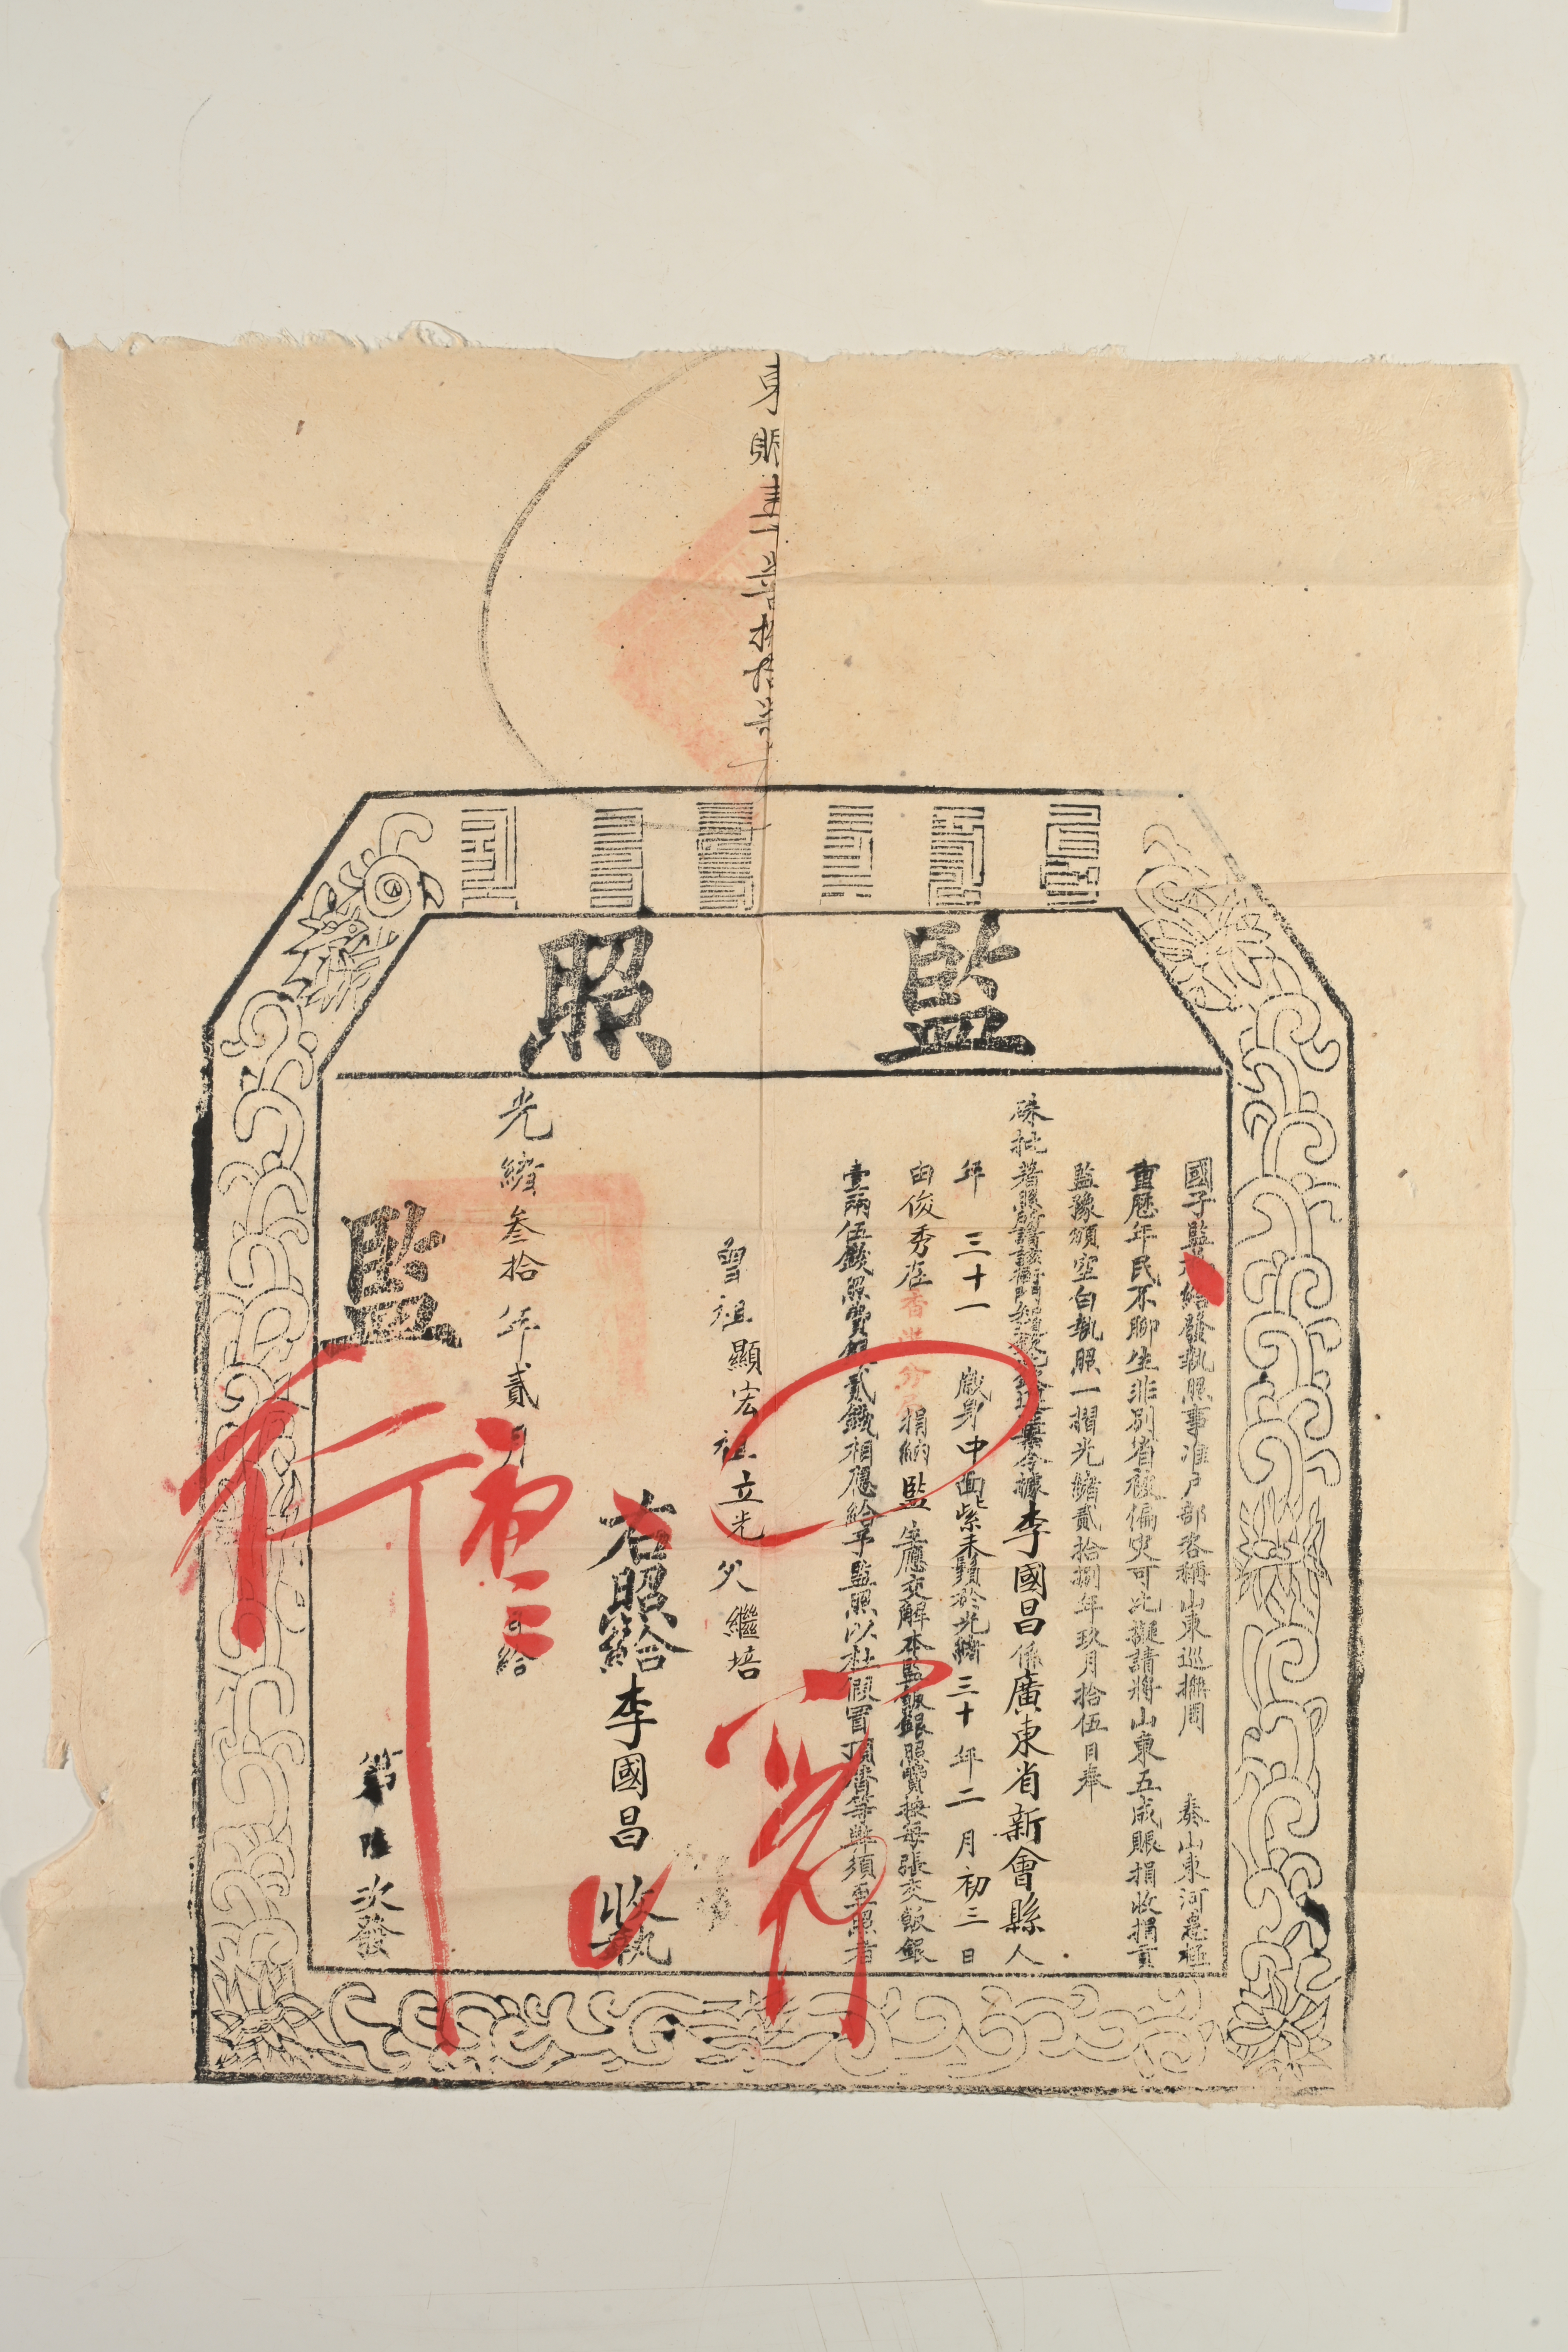 Jianzhao diploma issued by Guozijian in the 30th year of the Guangxu Emperor's reign, 1904, which was the entry ticket to a career in the civil service. Hong Kong Museum of History collection